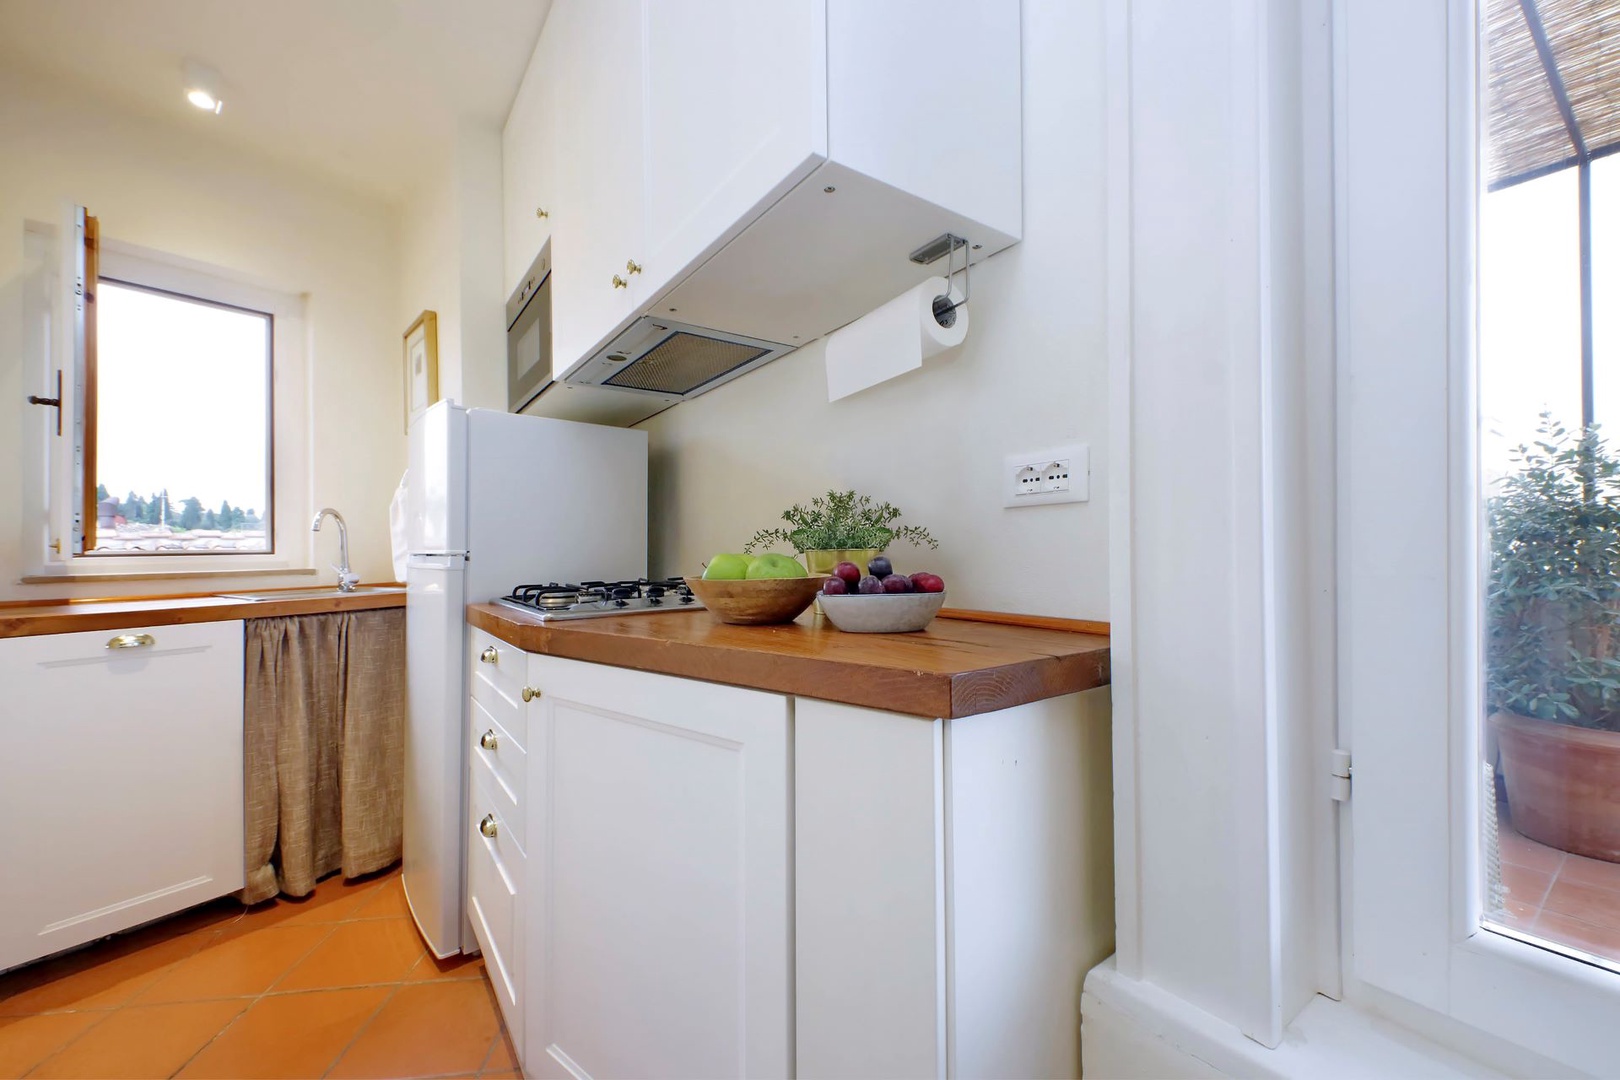 The kitchen offers easy access to the terrace.